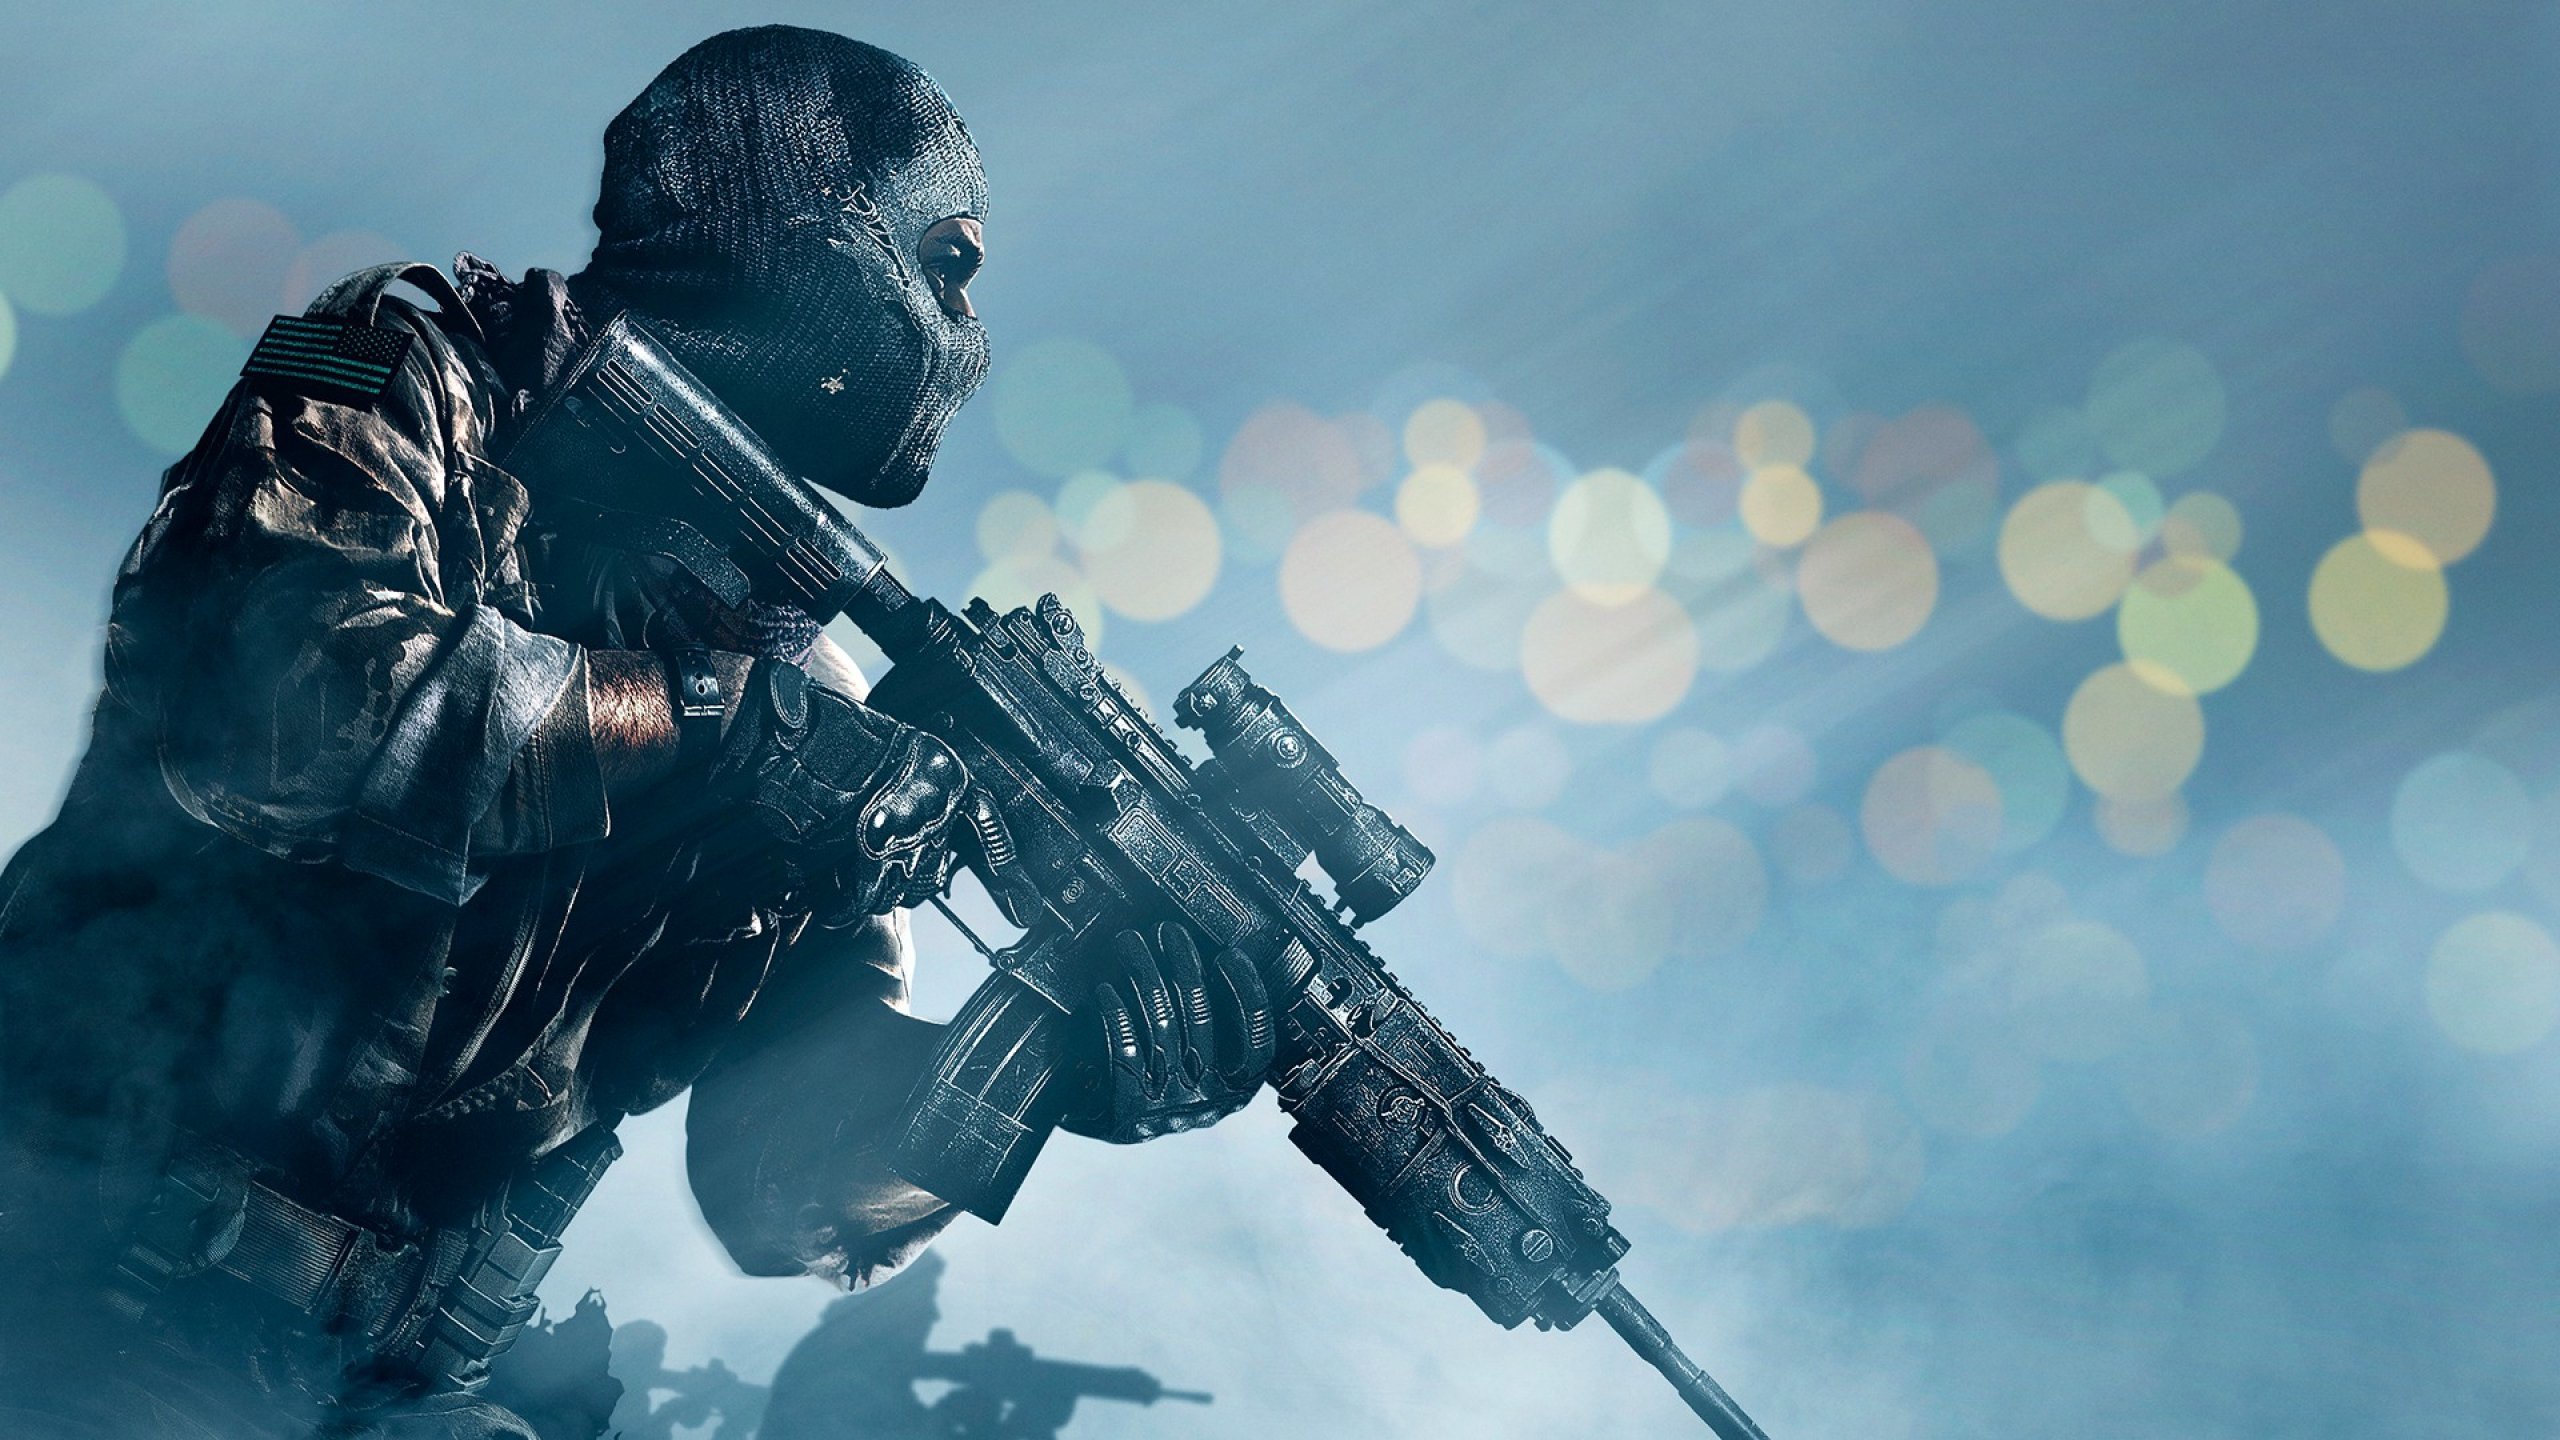 Best Call Of Duty: Ghosts wallpaper ID:215881 for High Resolution hd 2560x1440 computer